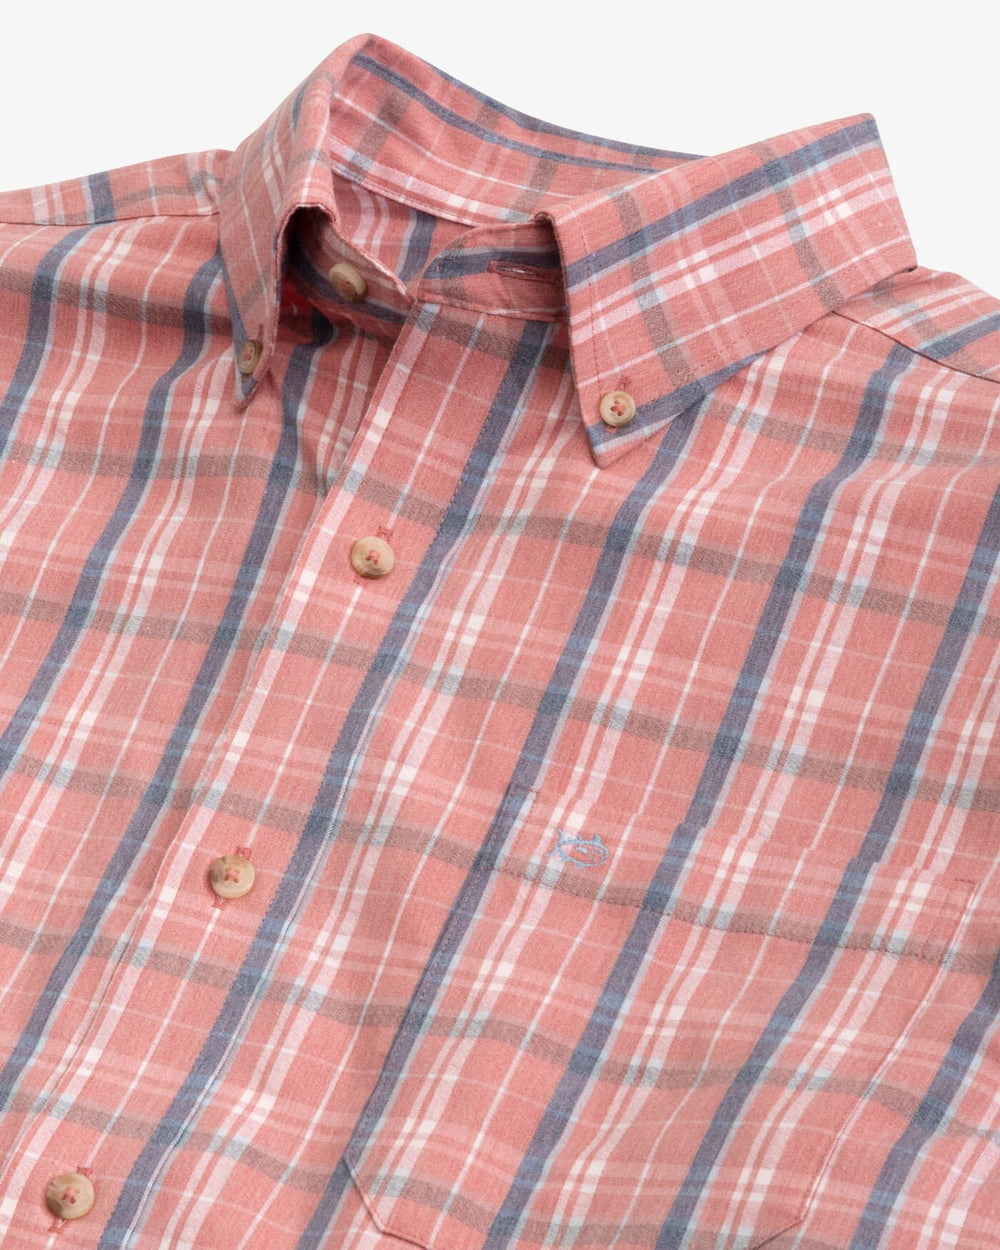 The detail view of the Southern Tide Coastal Passage Ashleland Plaid Sport Shirts by Southern Tide - Heather Dusty Coral